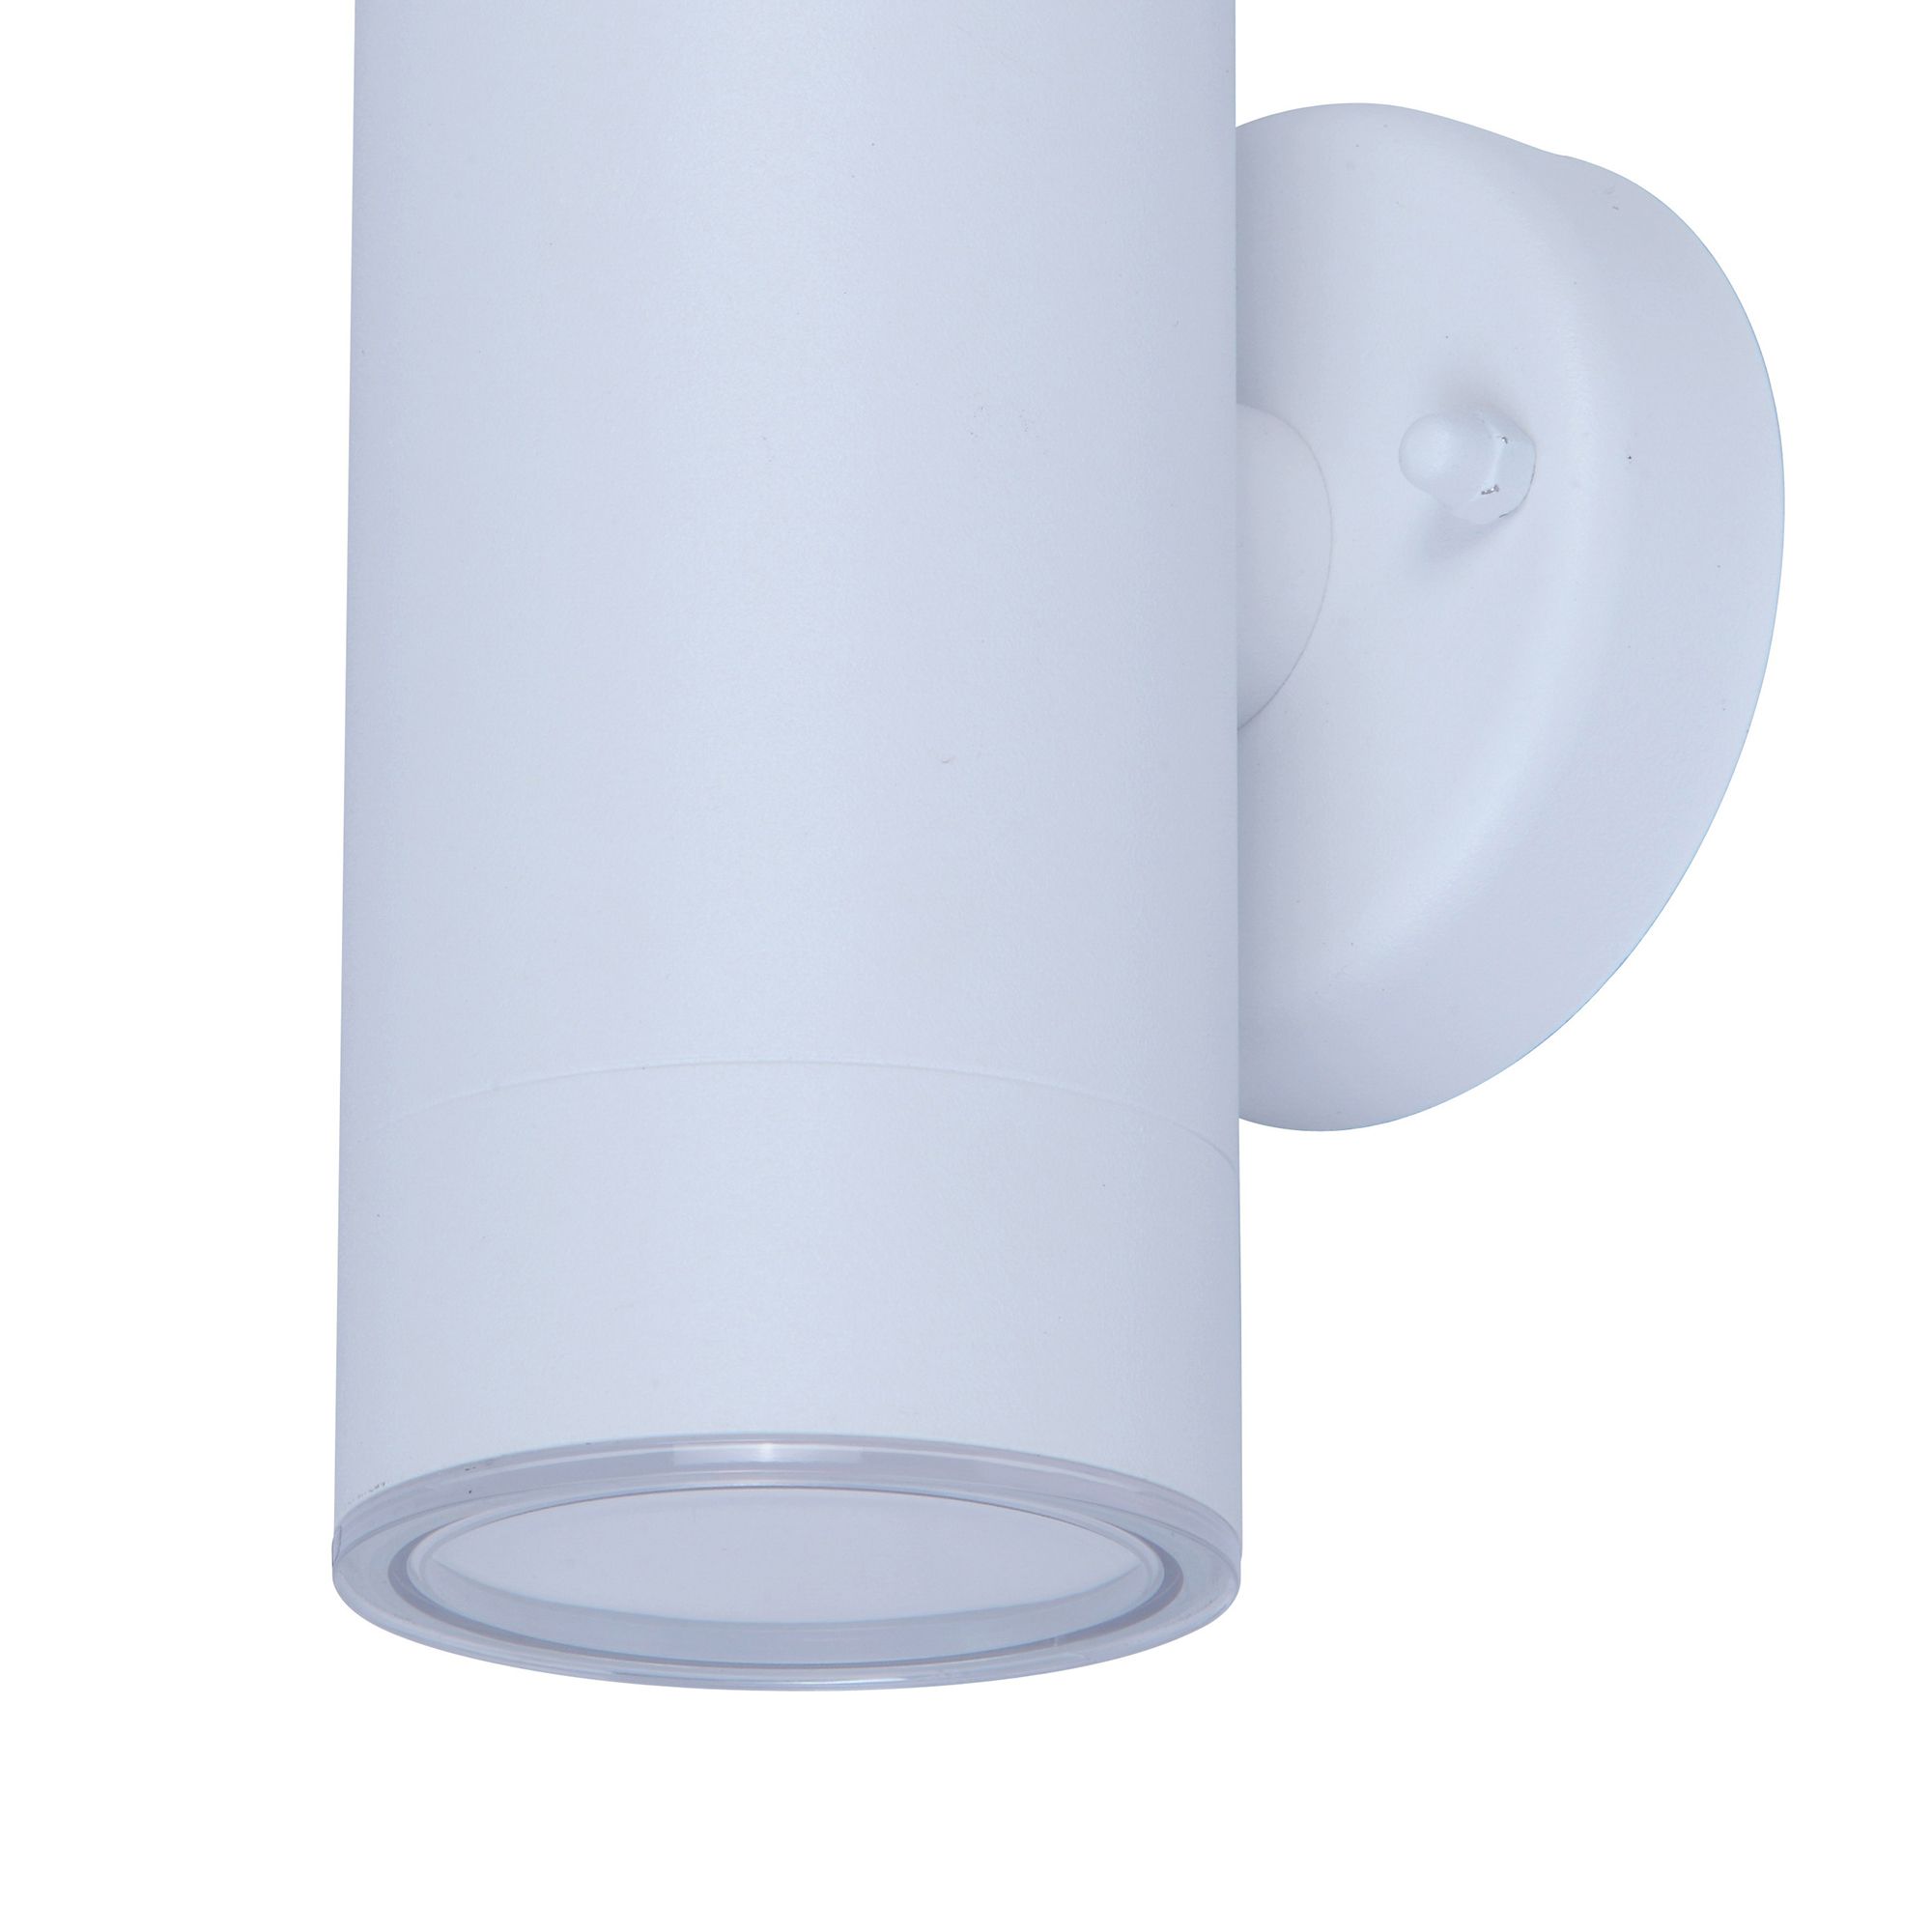 GoodHome Fixed Matt White Mains-powered Integrated LED Outdoor Double Wall light 760lm (Dia)6cm